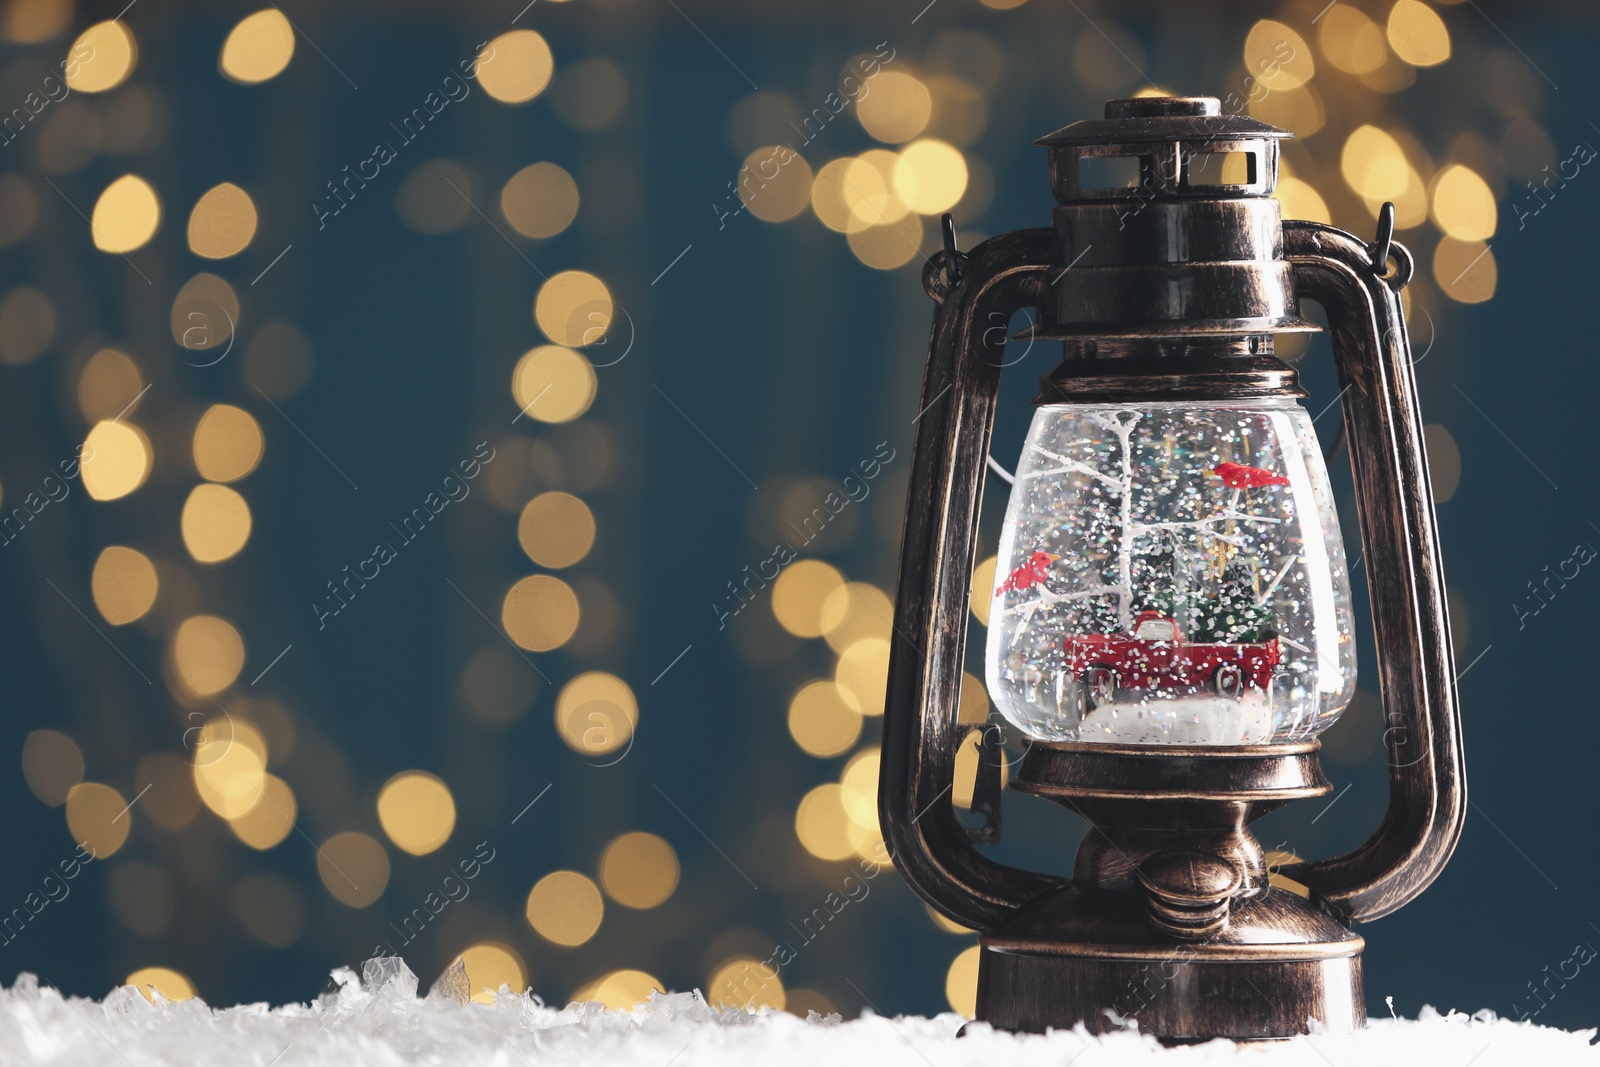 Photo of Snow globe in vintage lantern against blurred Christmas lights. Space for text